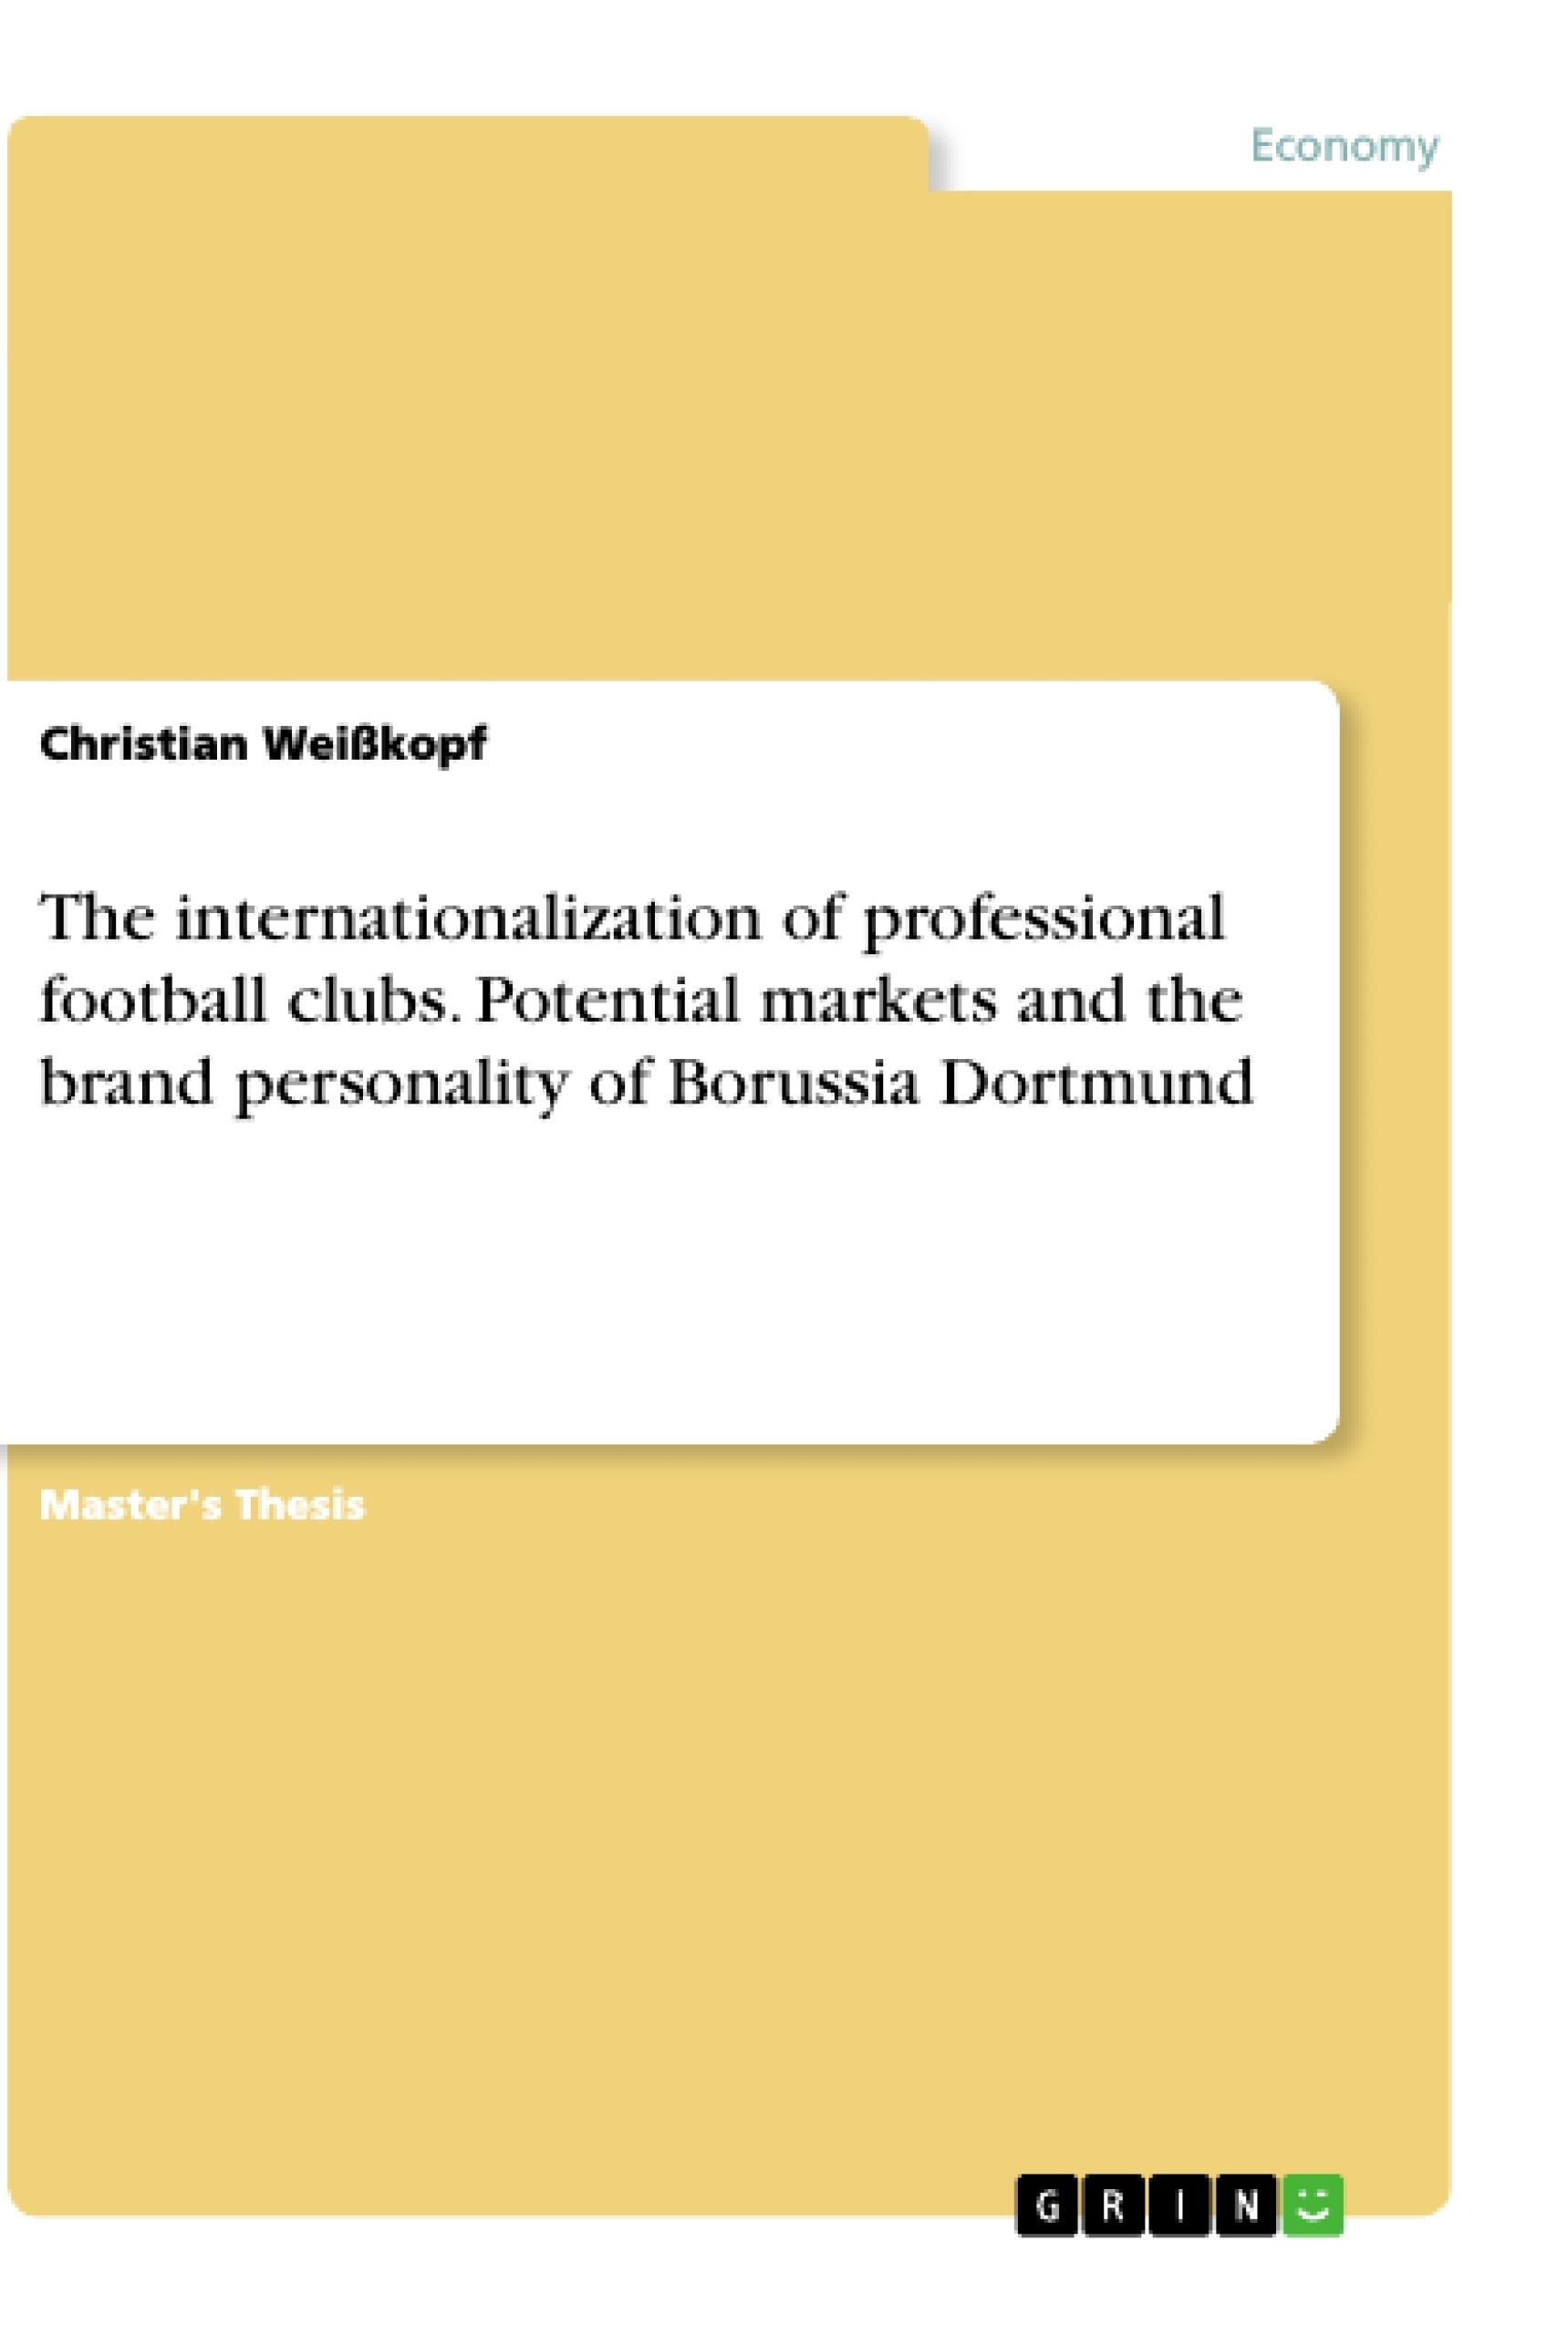 Title: The internationalization of professional football clubs. Potential markets and the brand personality of Borussia Dortmund